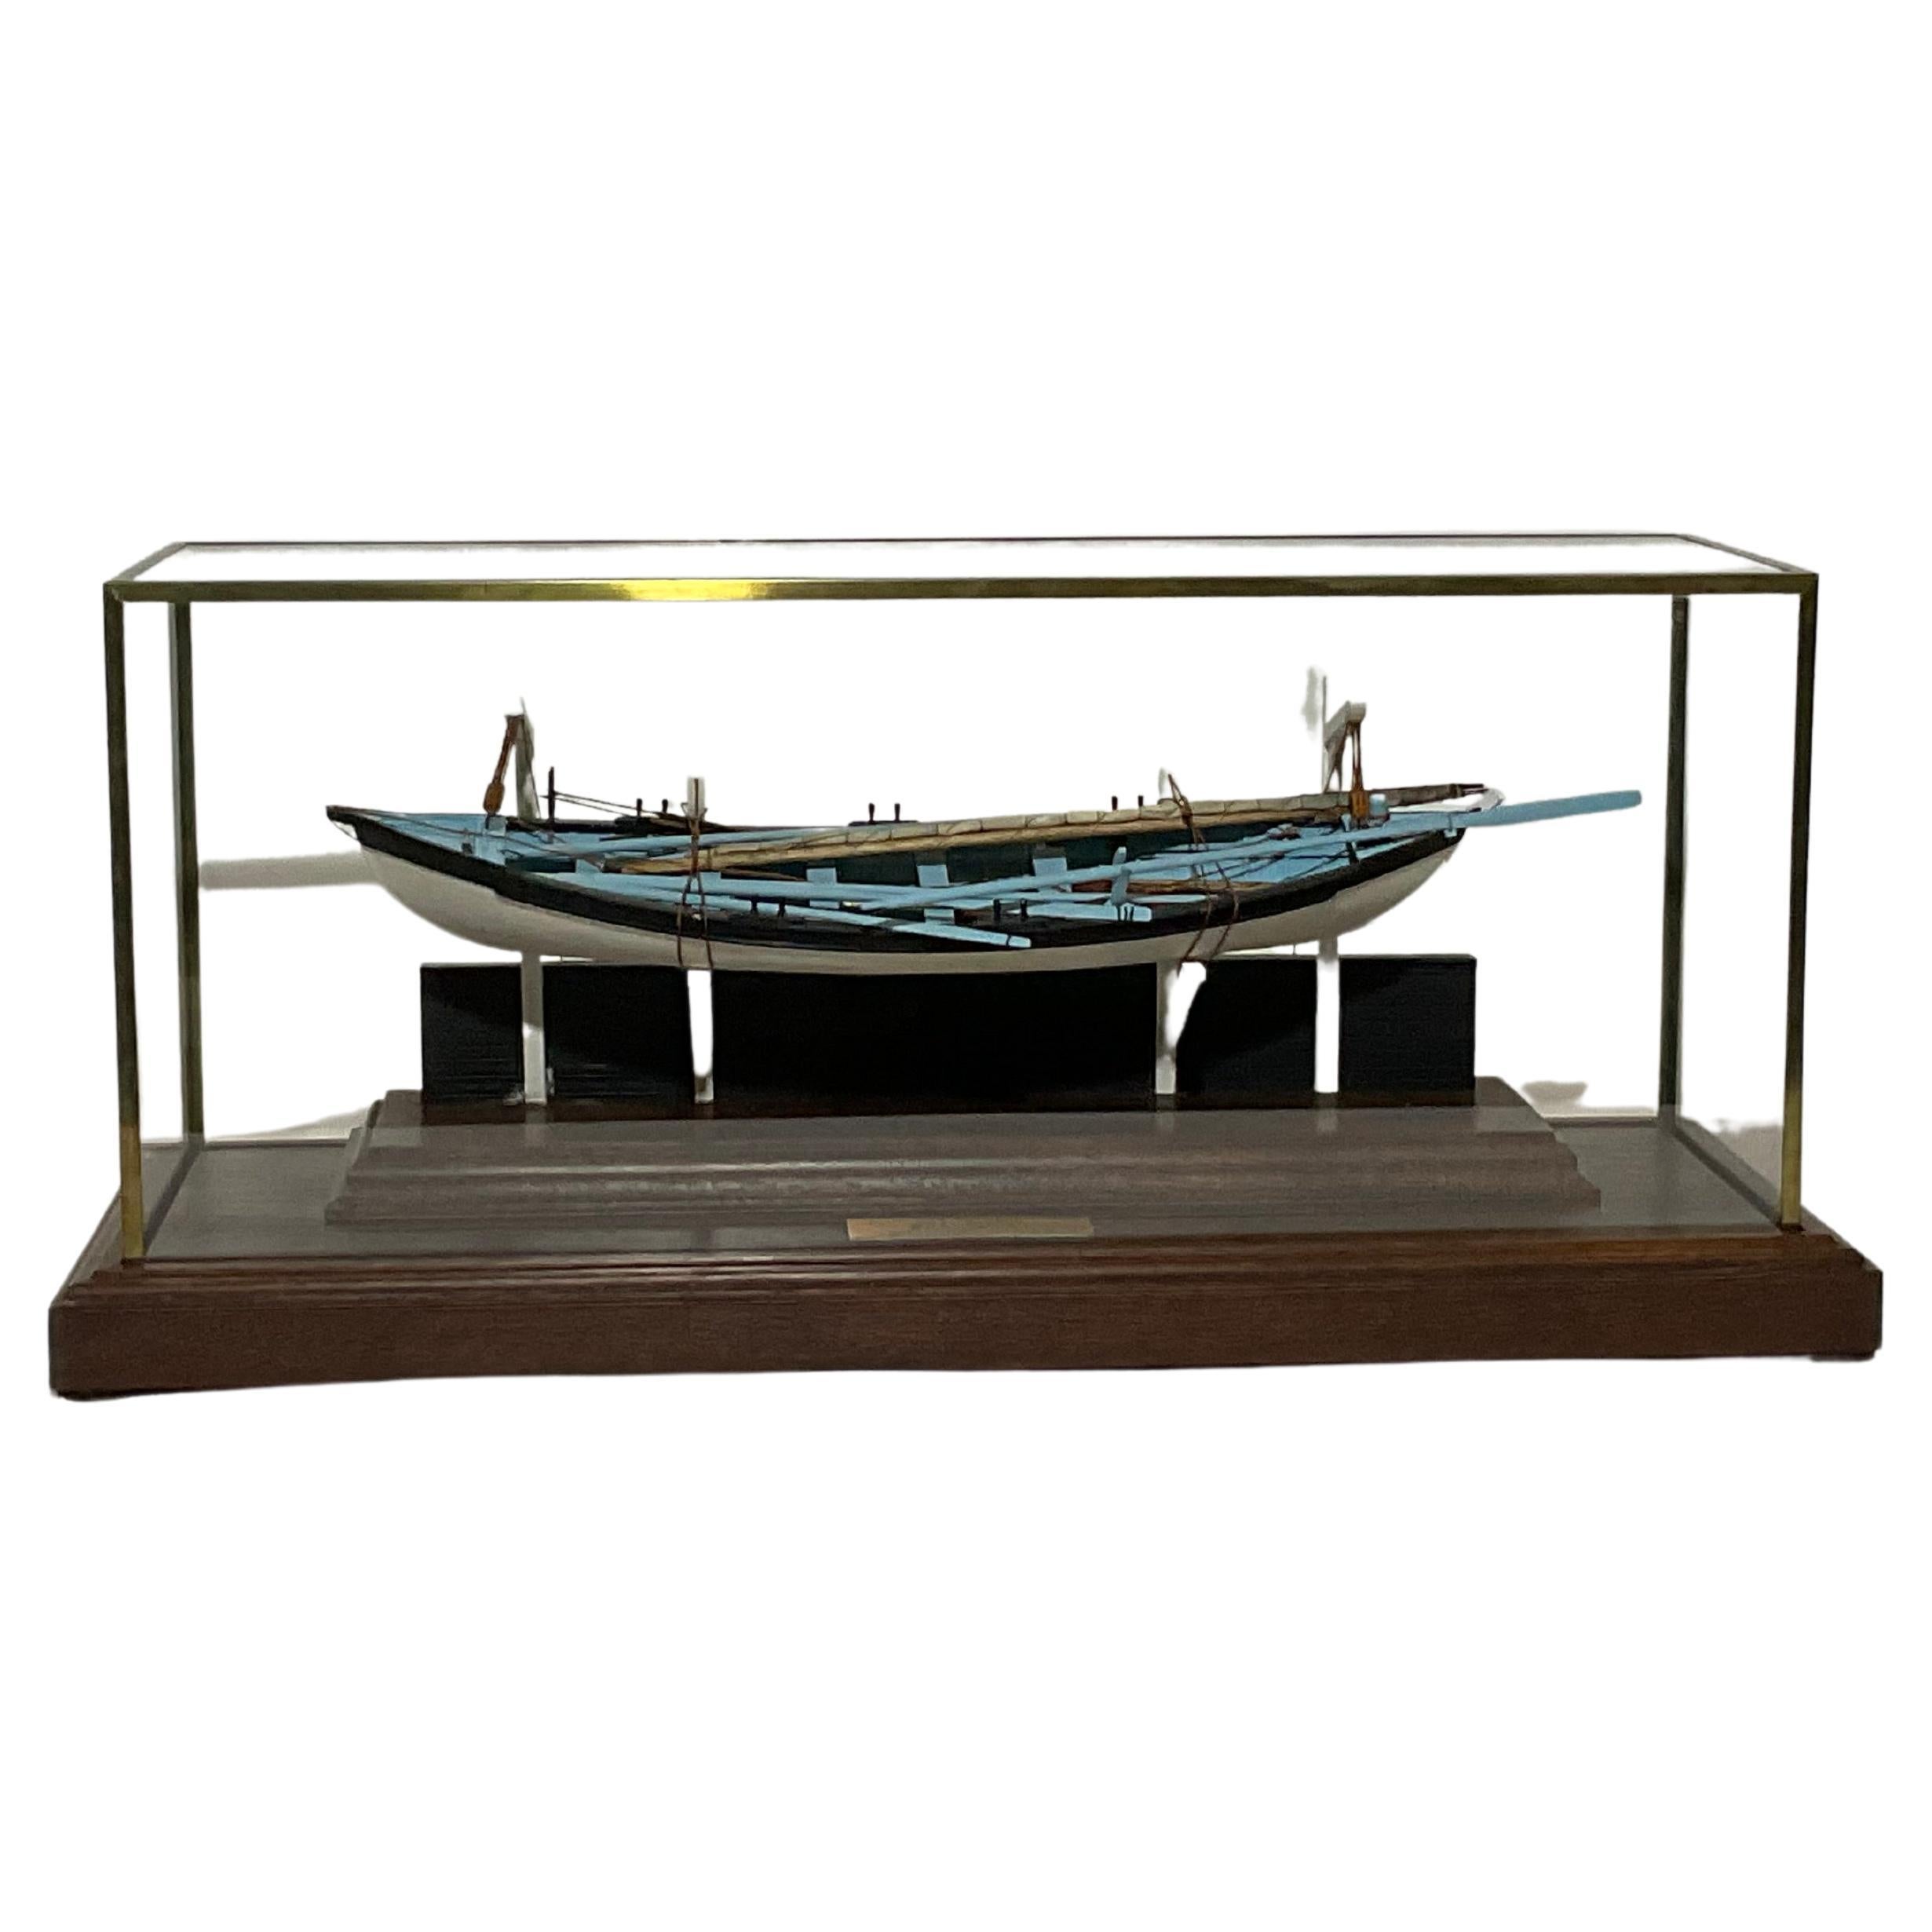 Whaleboat Model by William Hitchcock